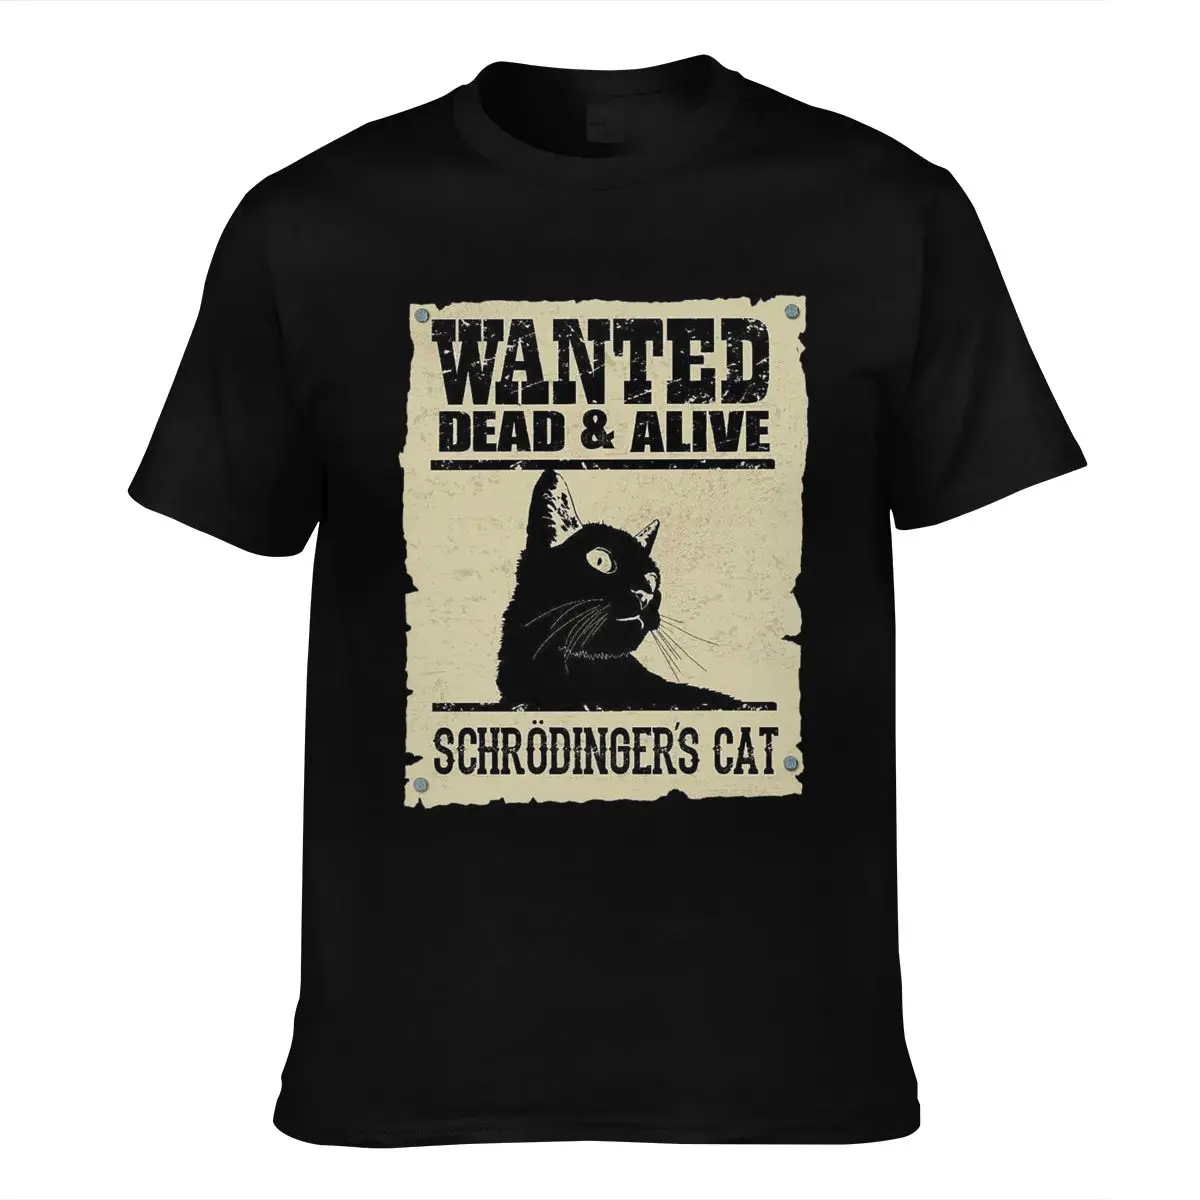 

Wanted Dead Alive Schrodingers Cat Tshirt Short-sleeved Tee Shirt S-6xl Made in Usa Cotton Men Black Print Casual O-neck Worsted